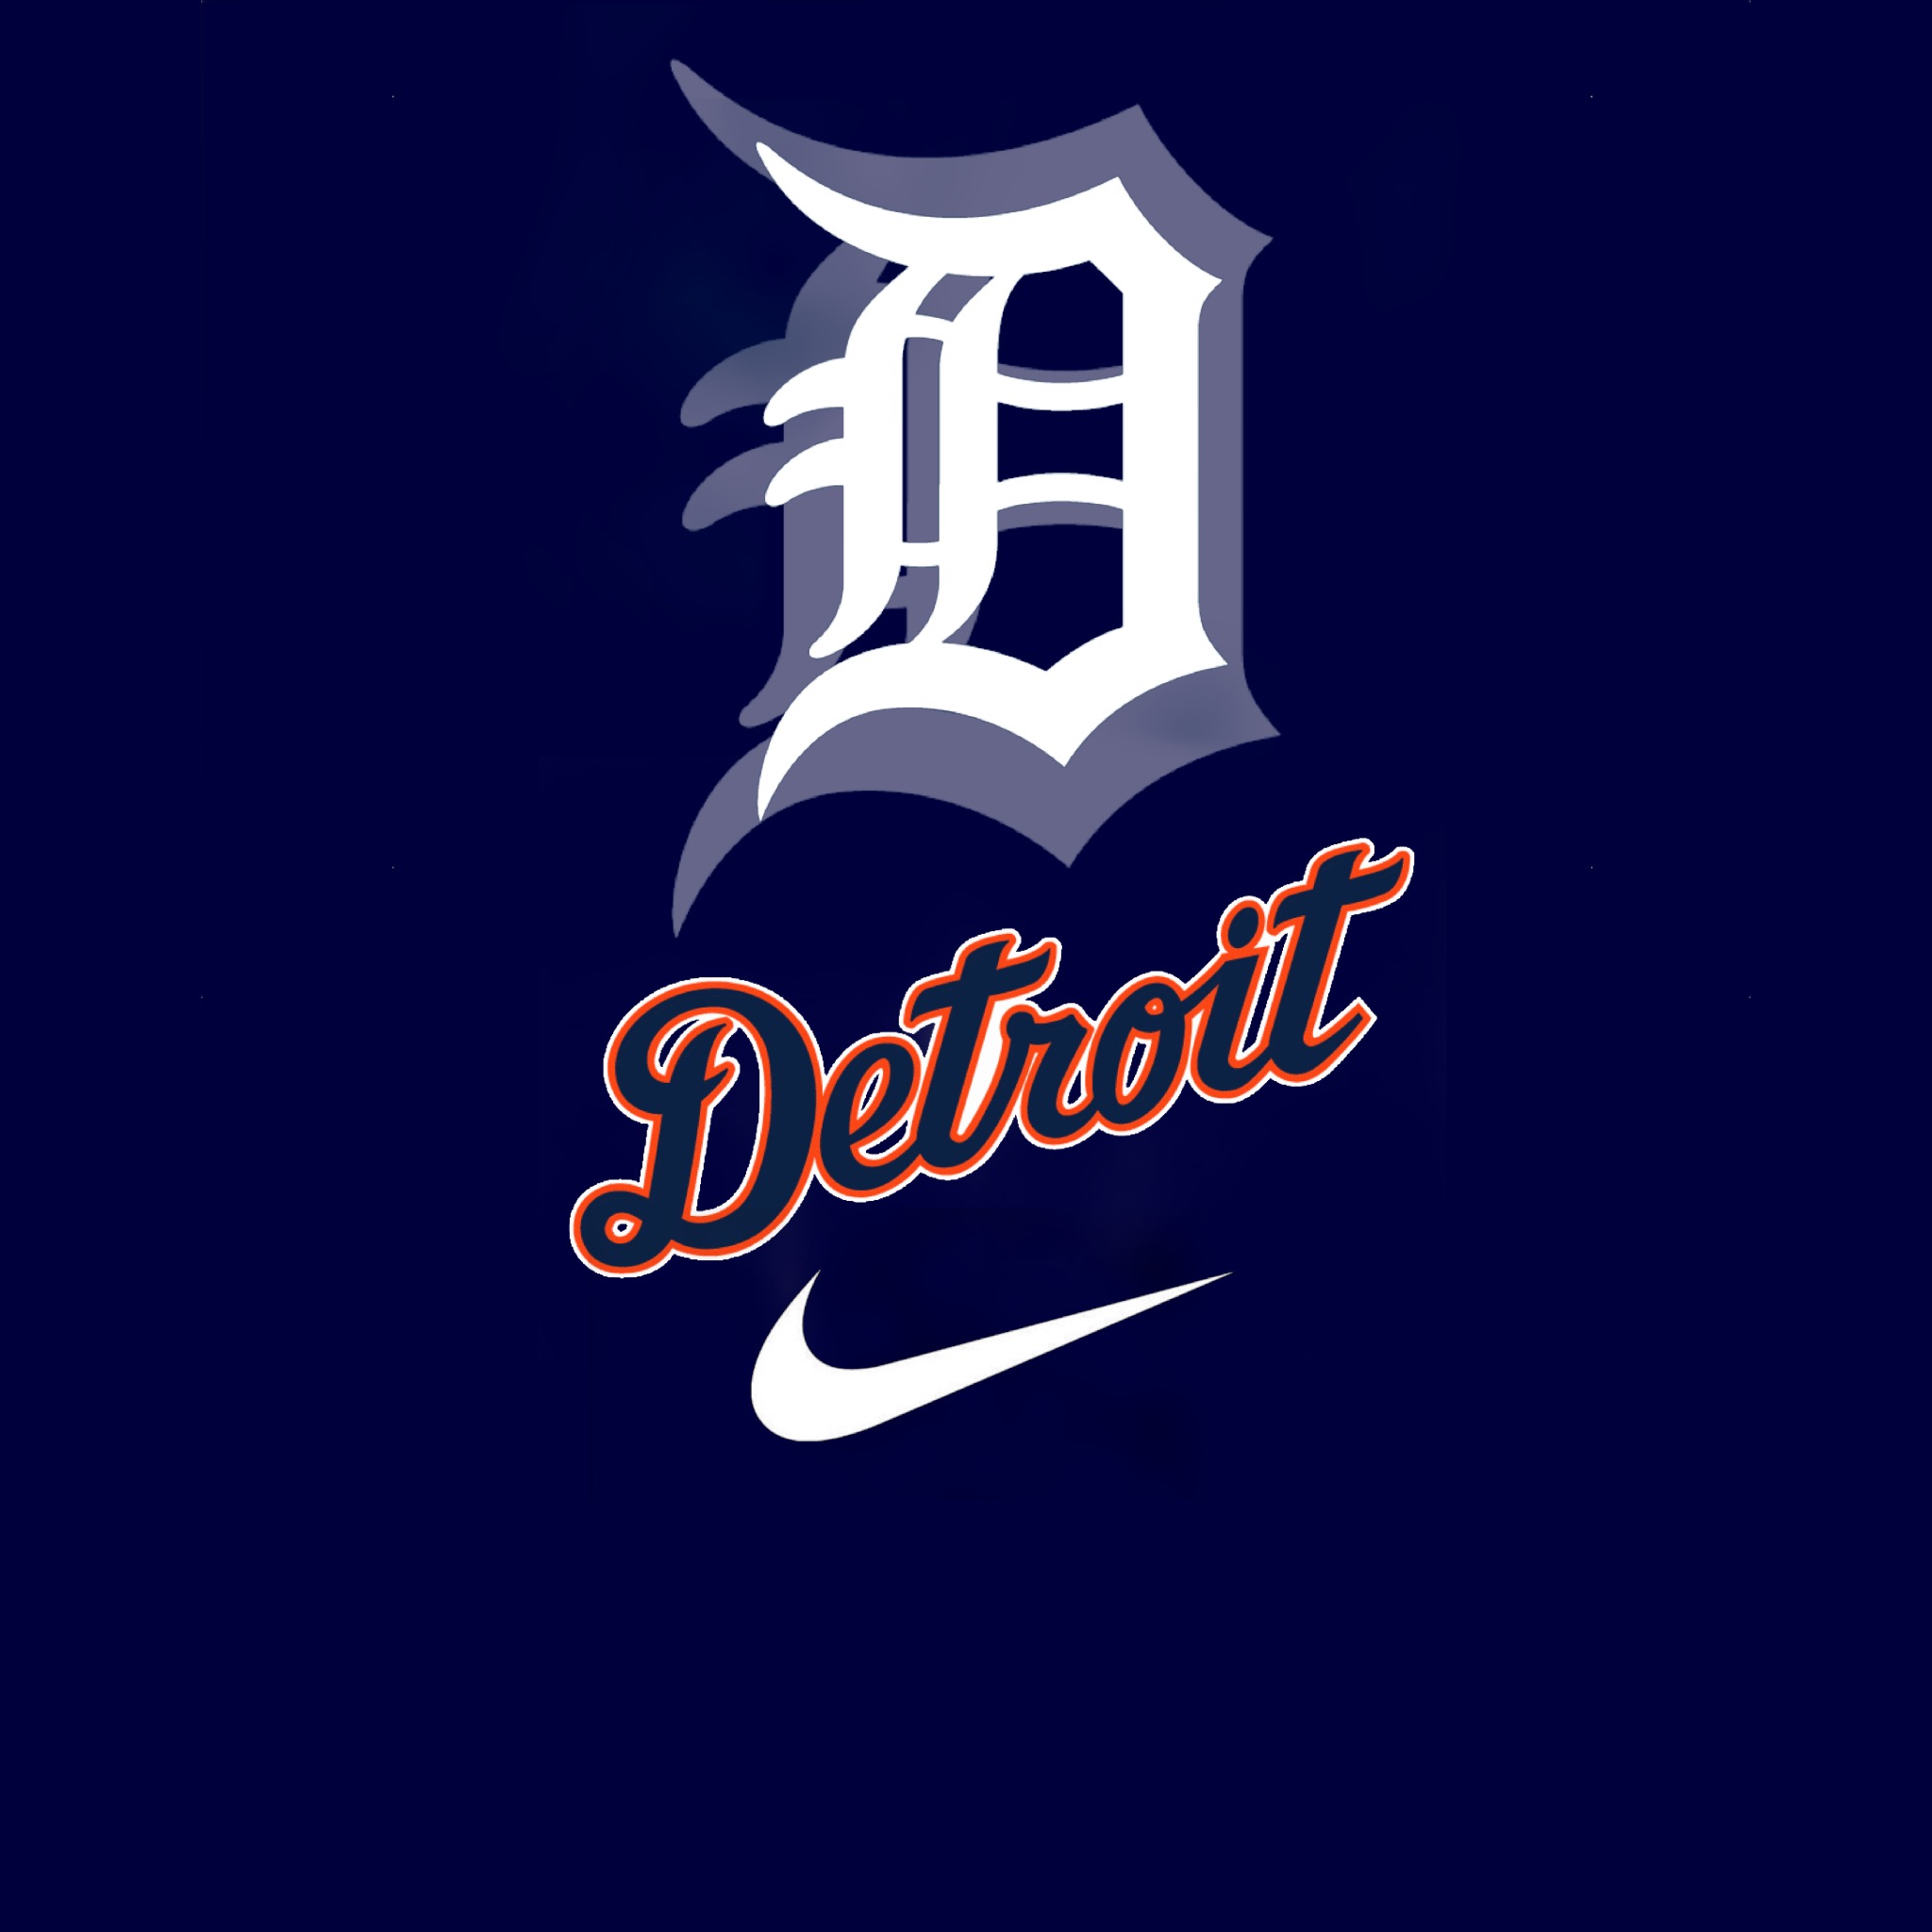 Sports logo wallpapers